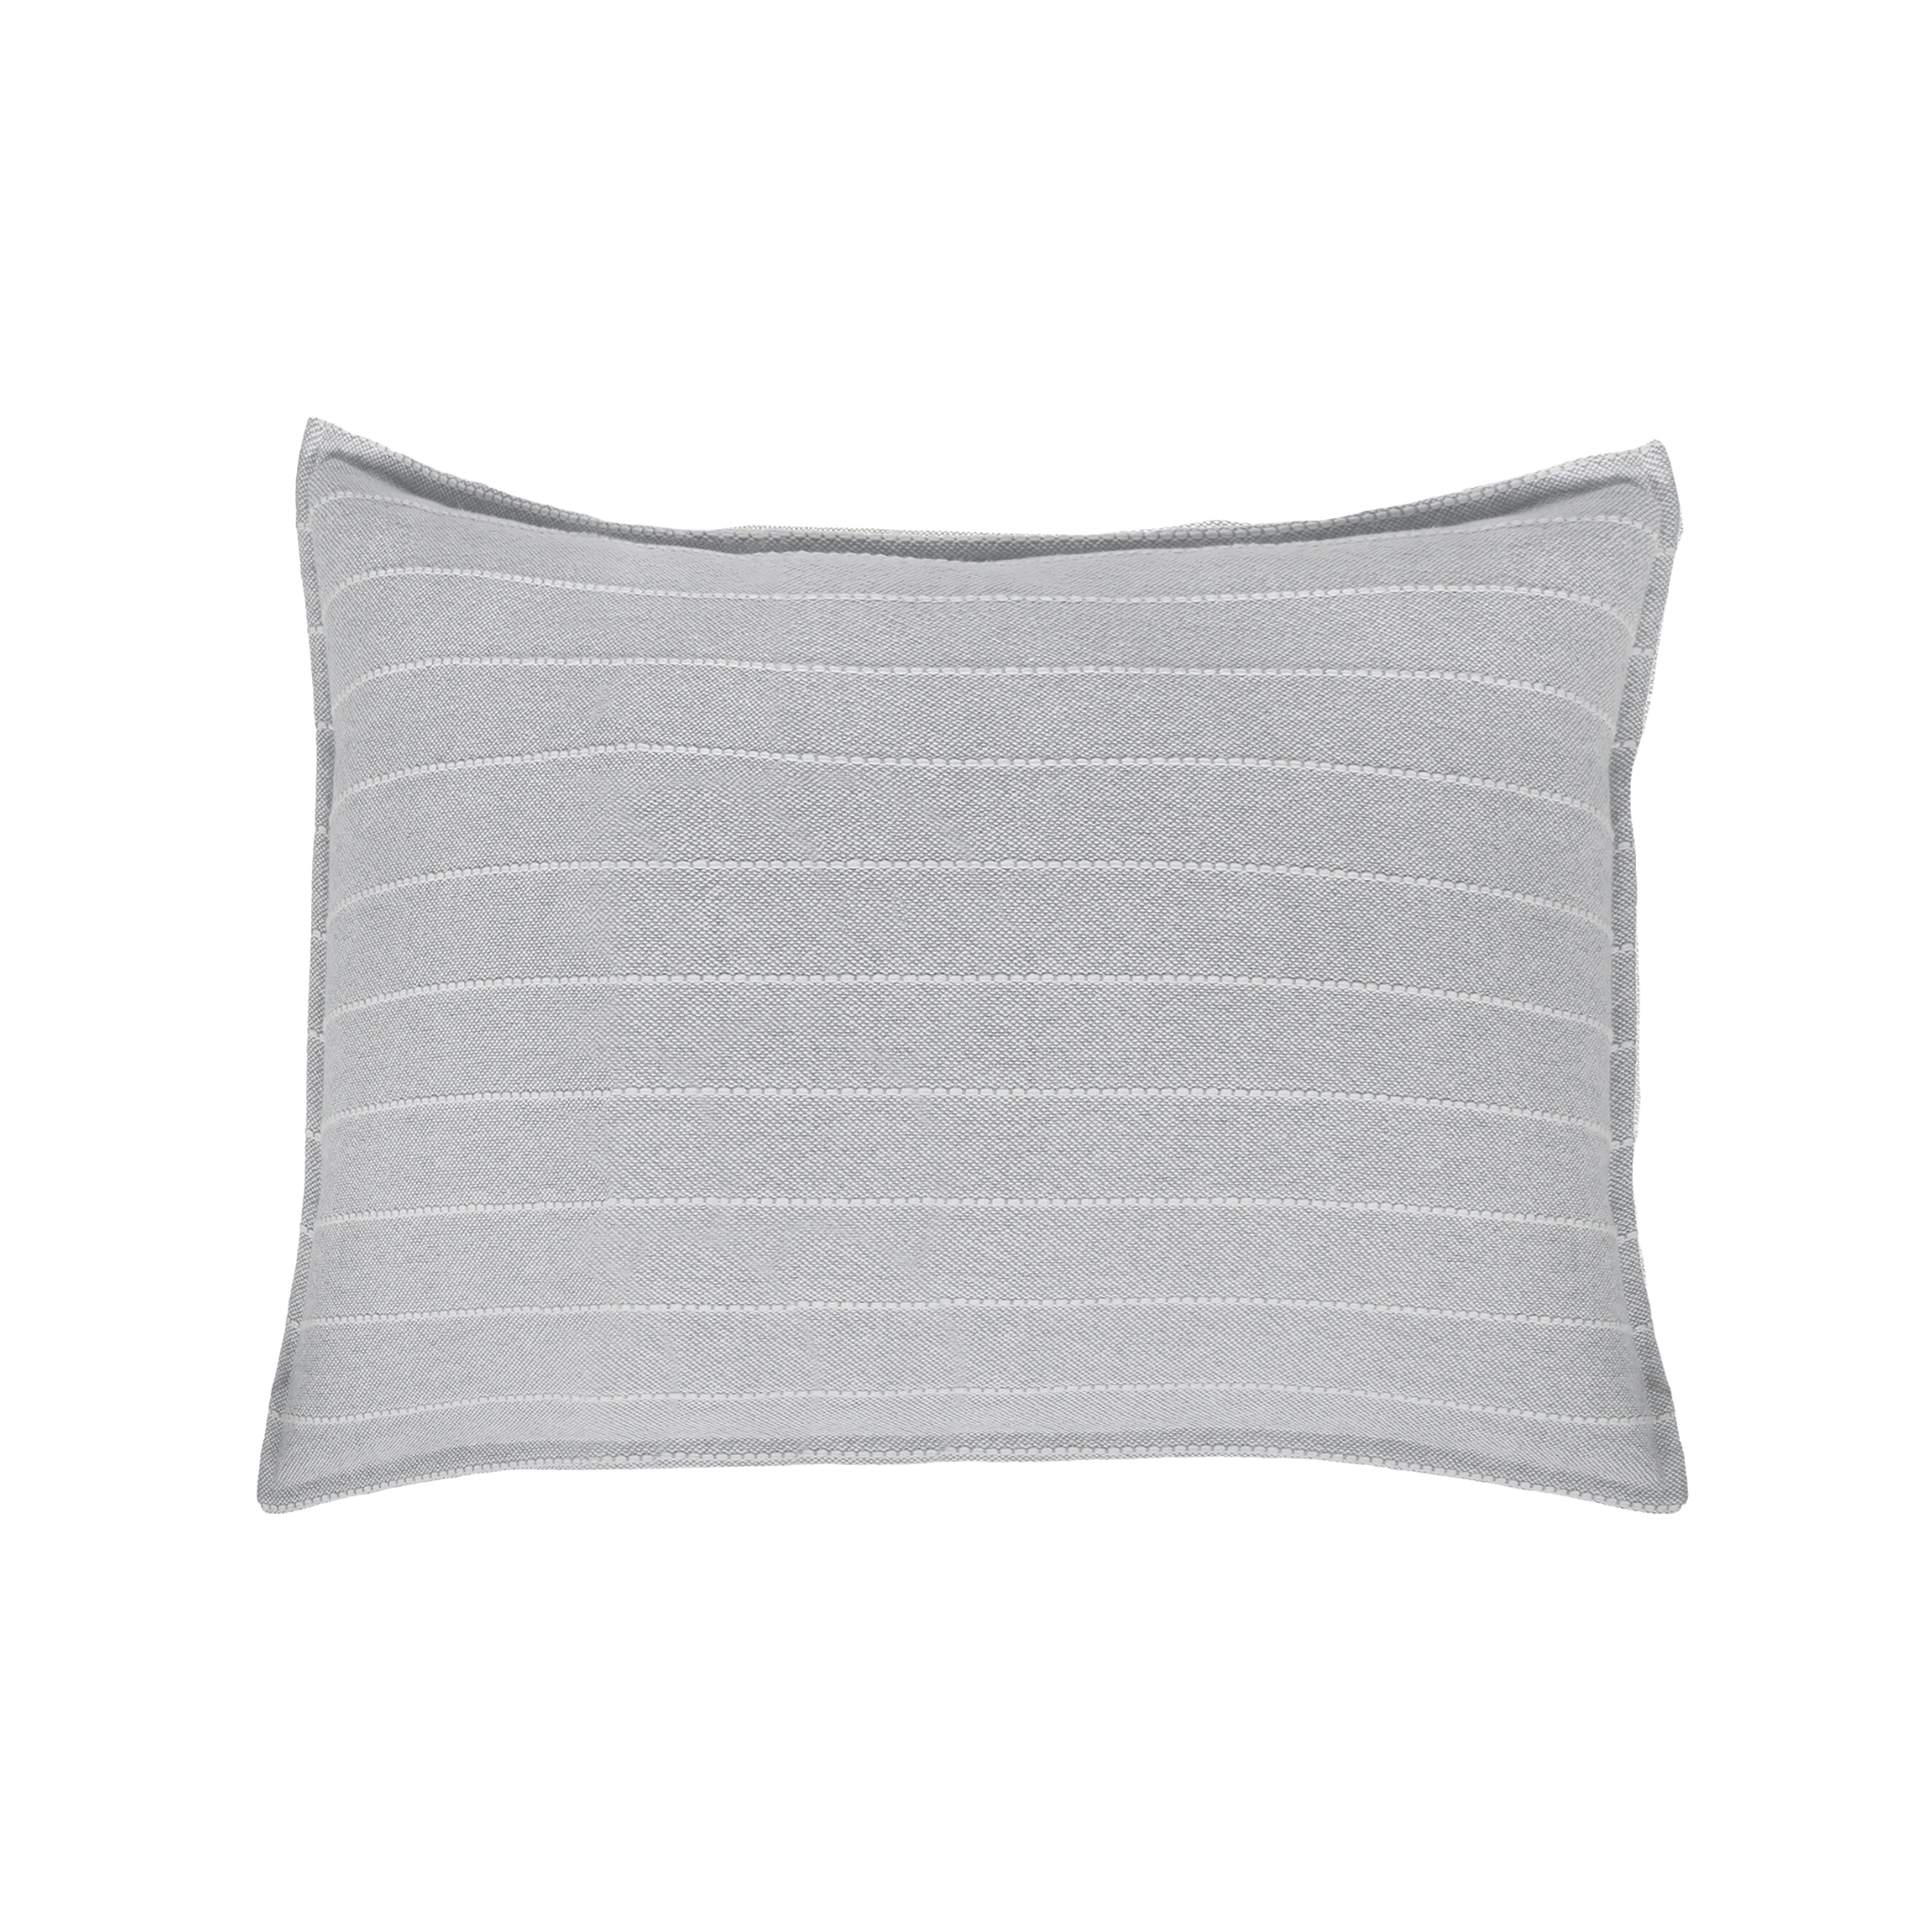 HENLEY BIG PILLOW 28" X 36" WITH INSERT - 2 COLORS-Pom Pom at Home